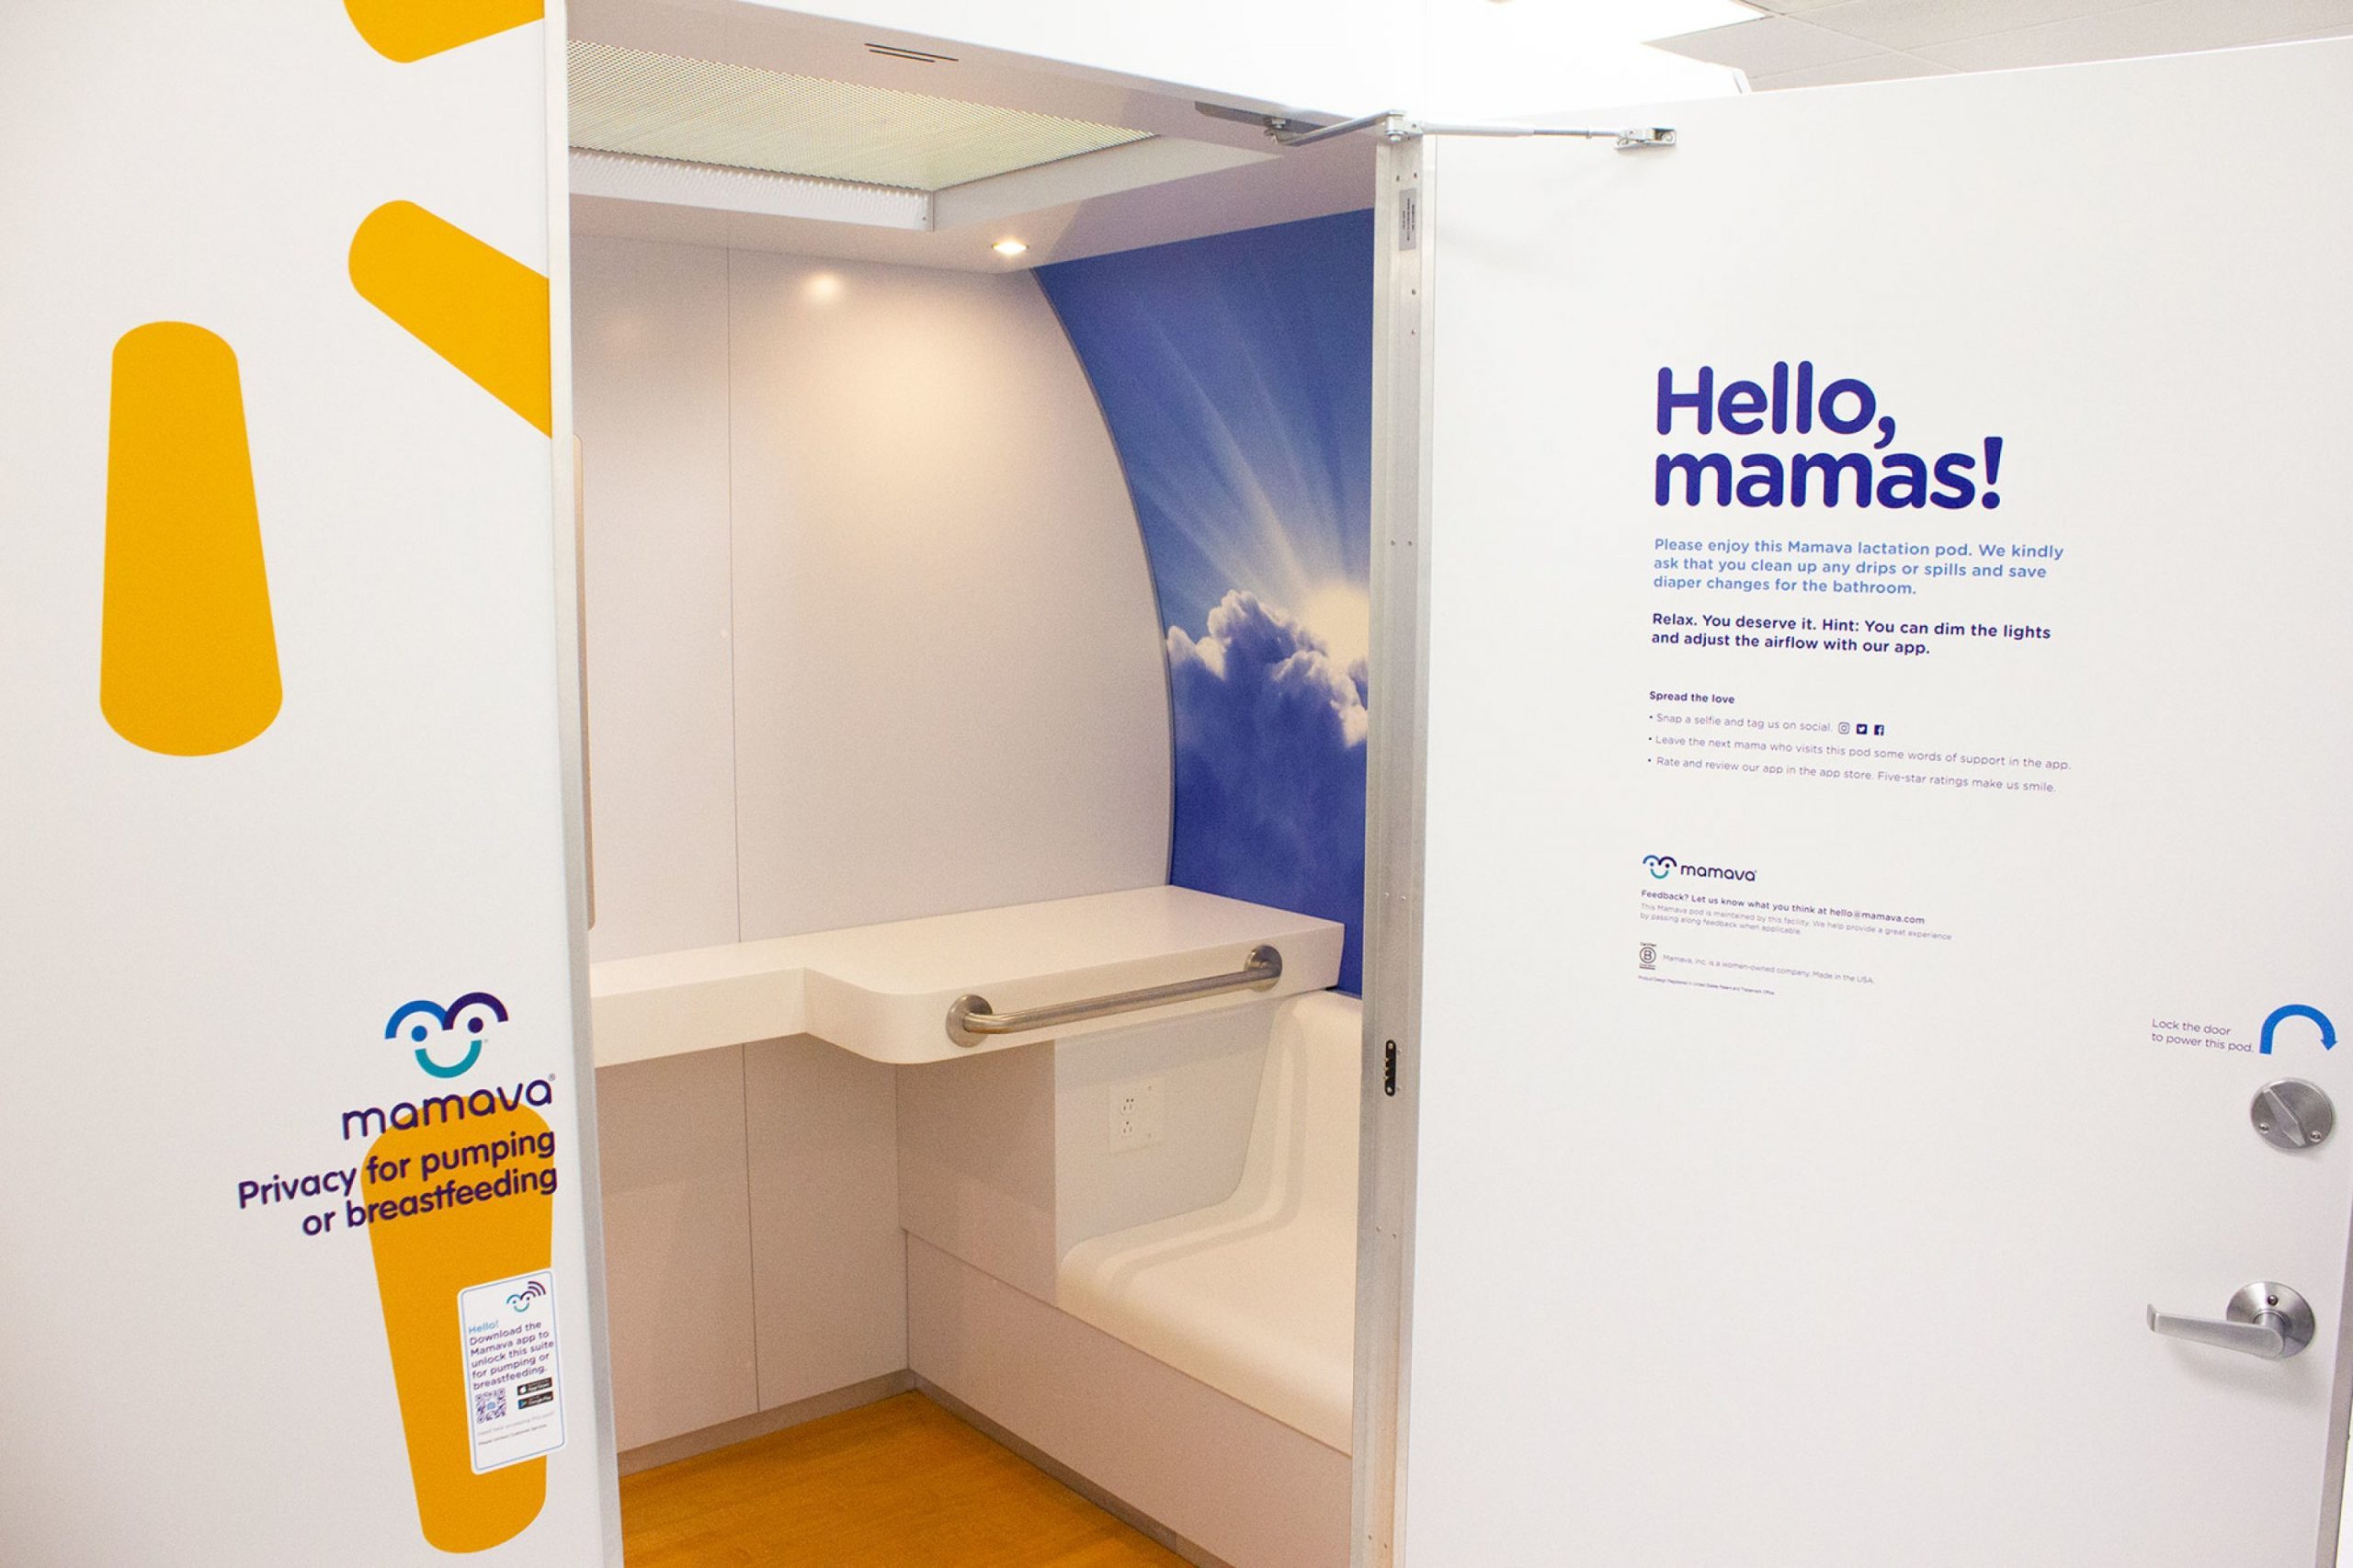 Walmart Has Breastfeeding Pods in Stores That Give Moms Privacy to Nurse or Pump